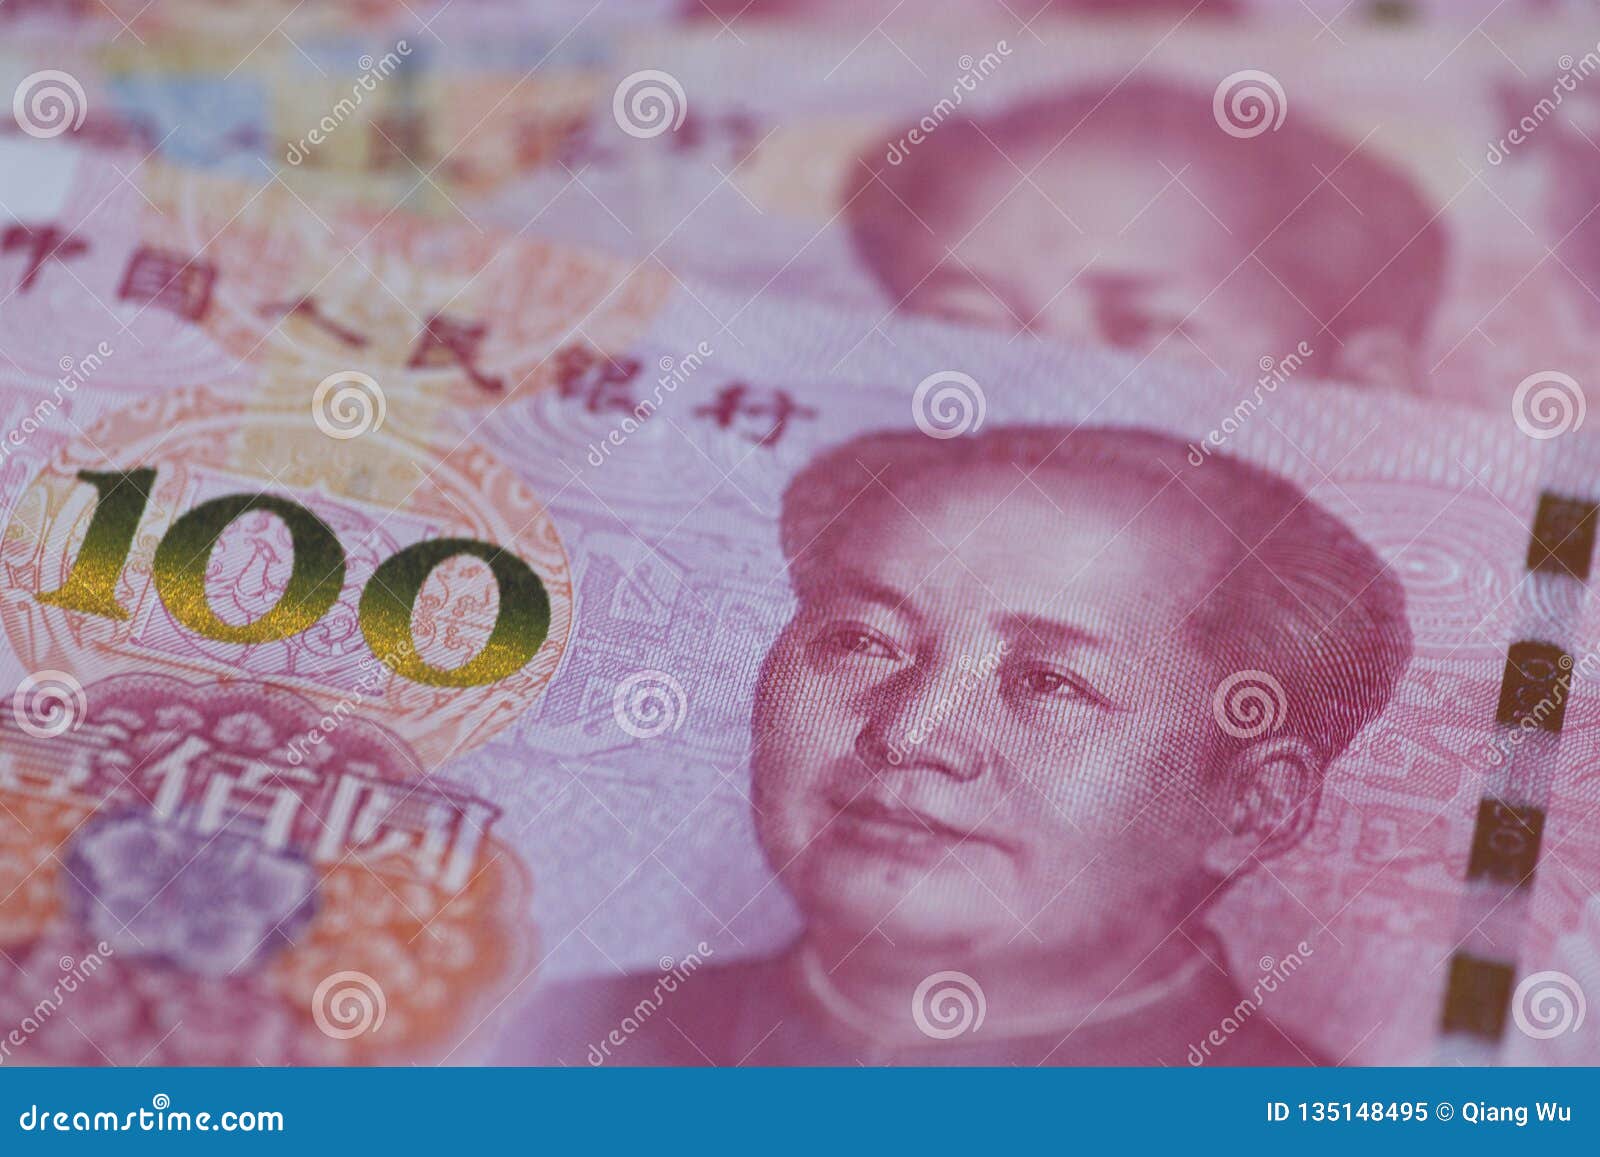 the people`s bank of china 100 yuan currency, economy, rmb, finance, investment, interest rate, exchange rate, government,